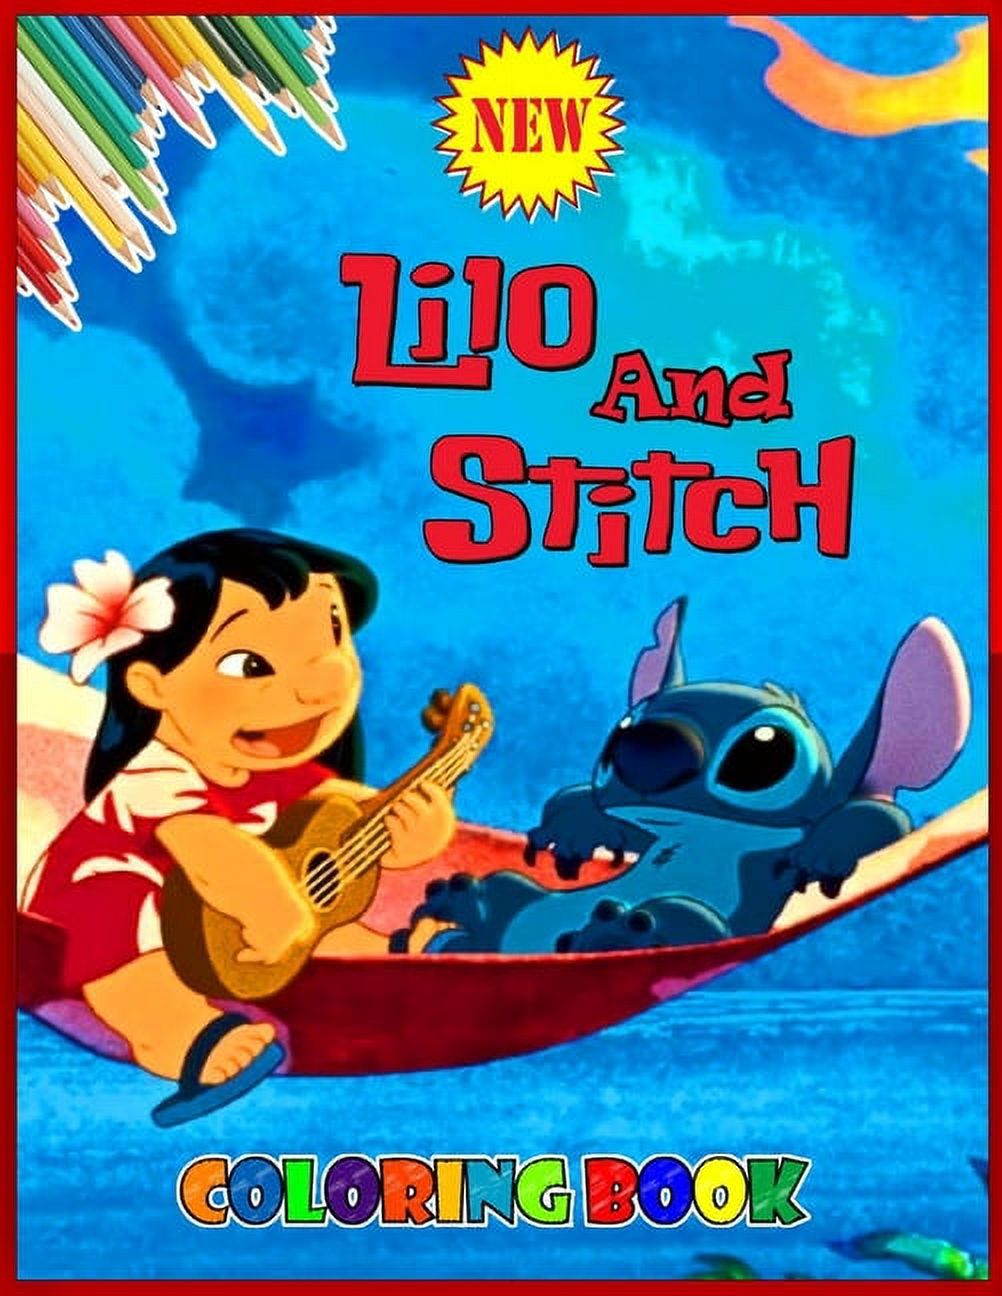 Lilo And Stitch Coloring Book : A Great Lilo And Stitch Coloring Book For  Kids With Unique Hand-Drawn Illustrations Of Lilo And Stitch, +25 Pages of